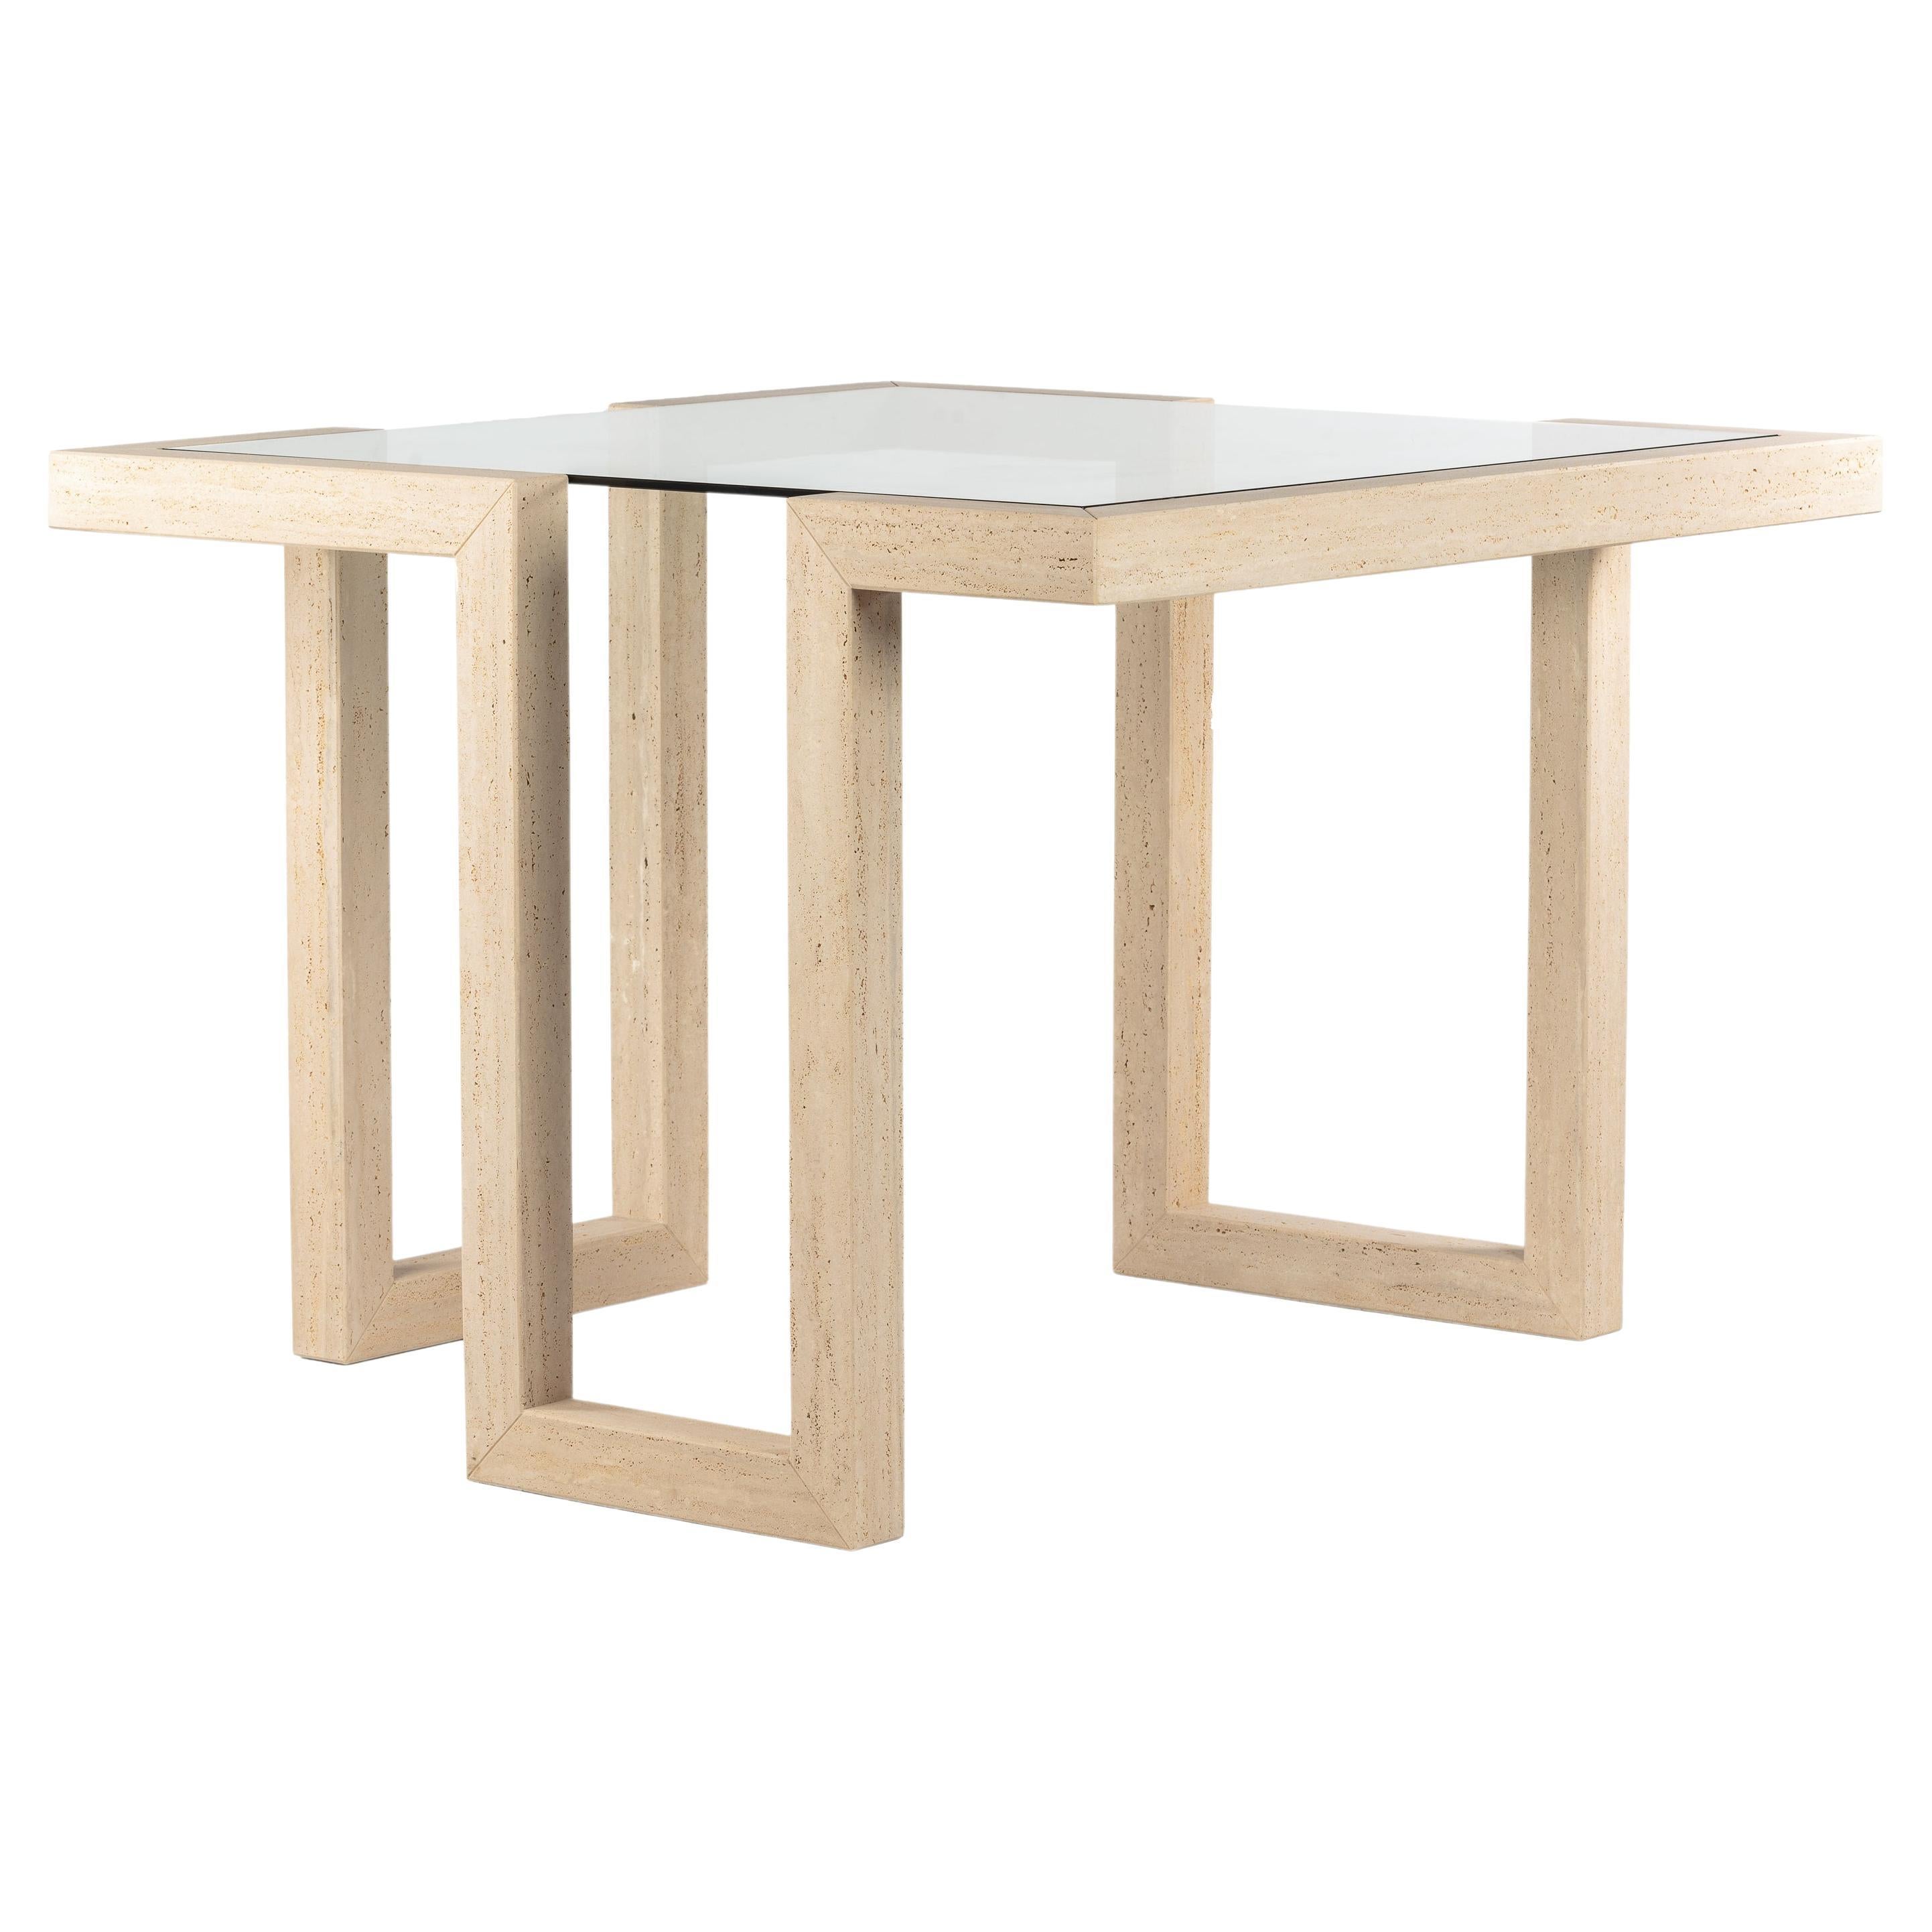 Castile Dining Table Roman Travertine Contemporary Marble Design In Stock For Sale